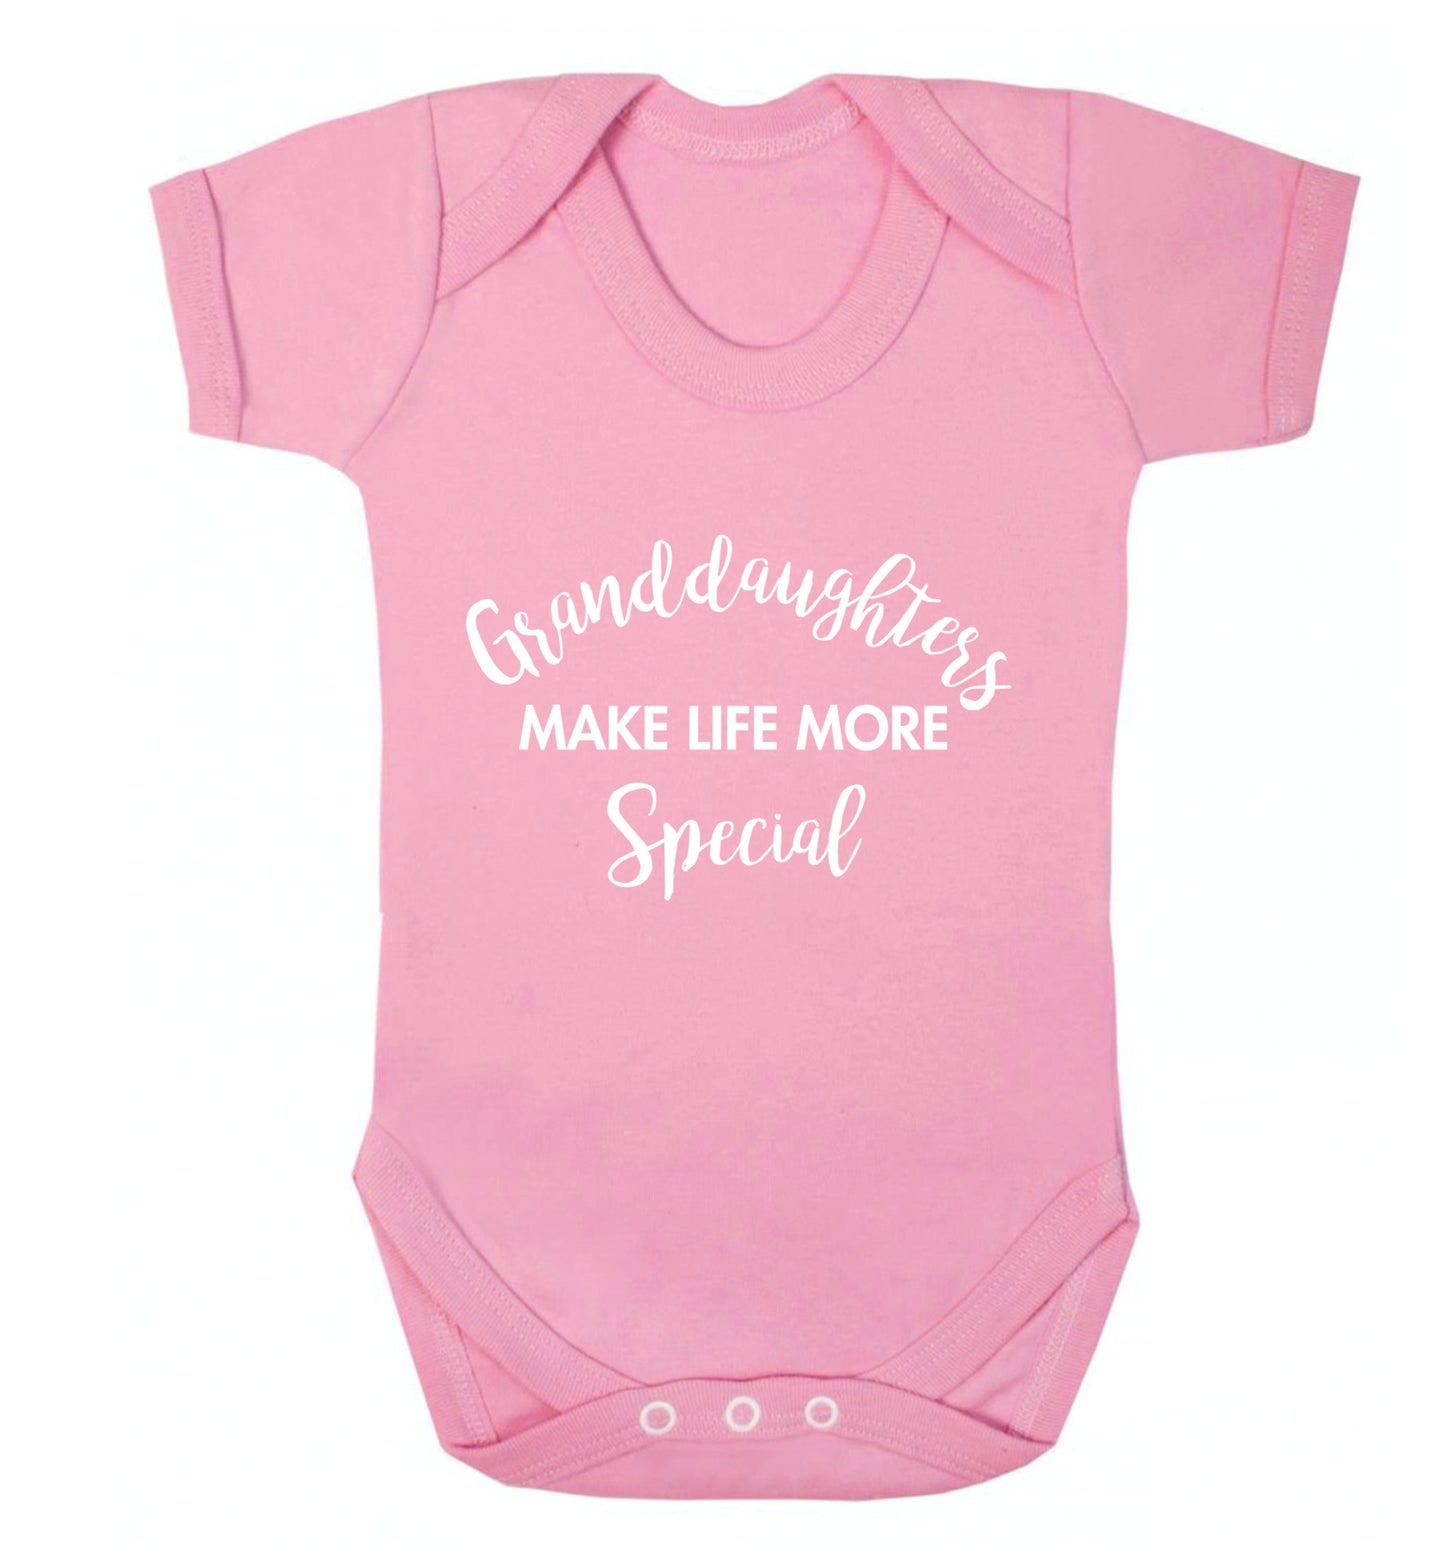 Granddaughters make life more special Baby Vest pale pink 18-24 months